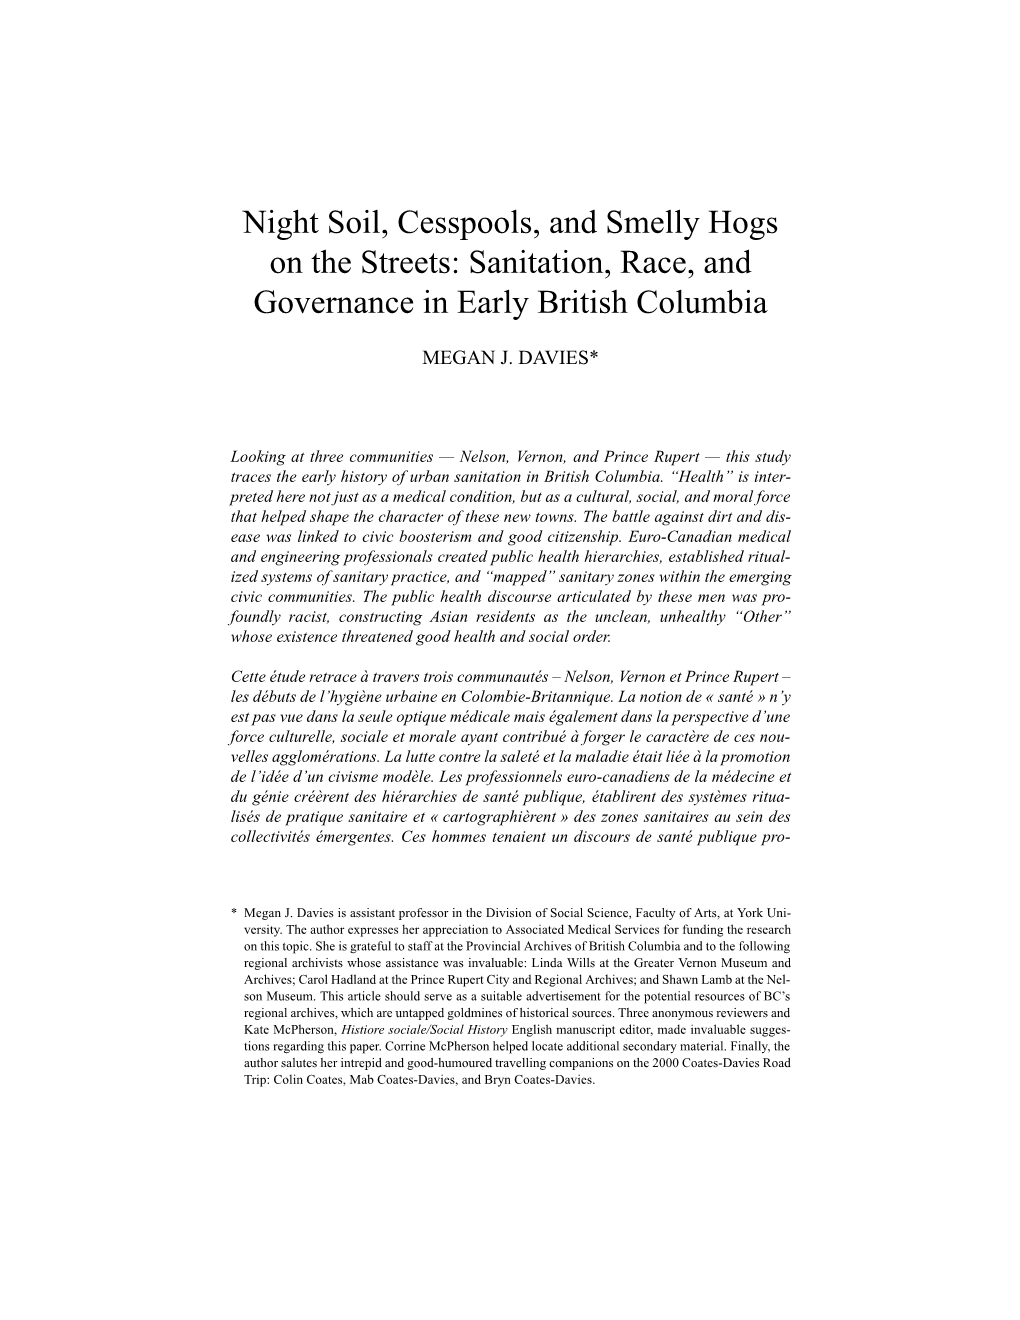 Sanitation, Race, and Governance in Early British Columbia